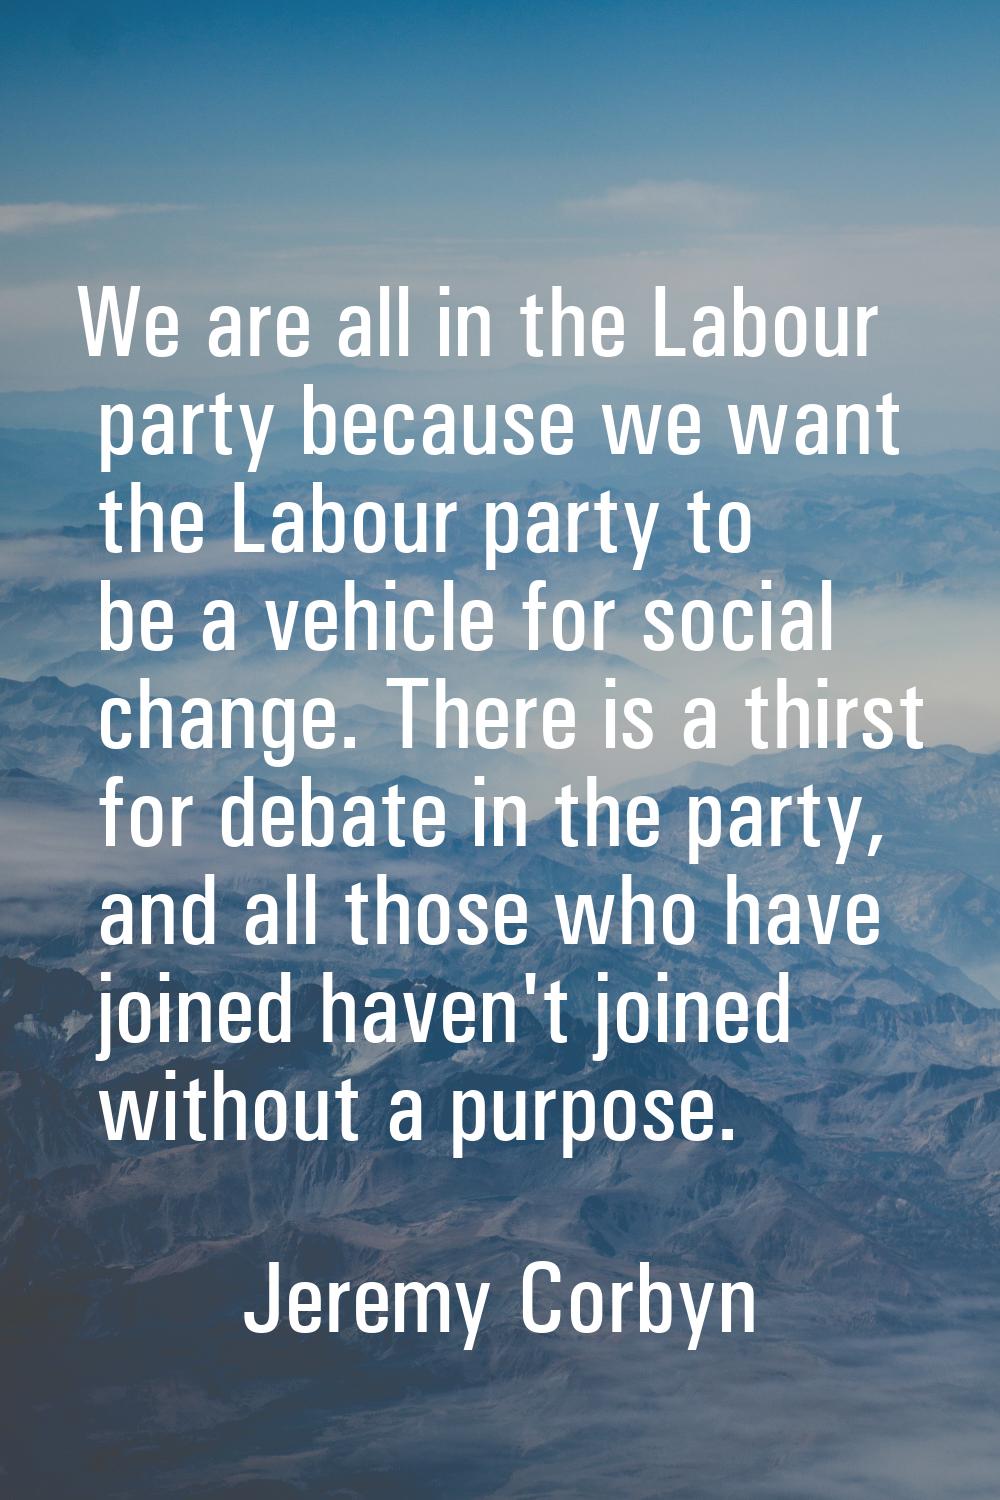 We are all in the Labour party because we want the Labour party to be a vehicle for social change. 